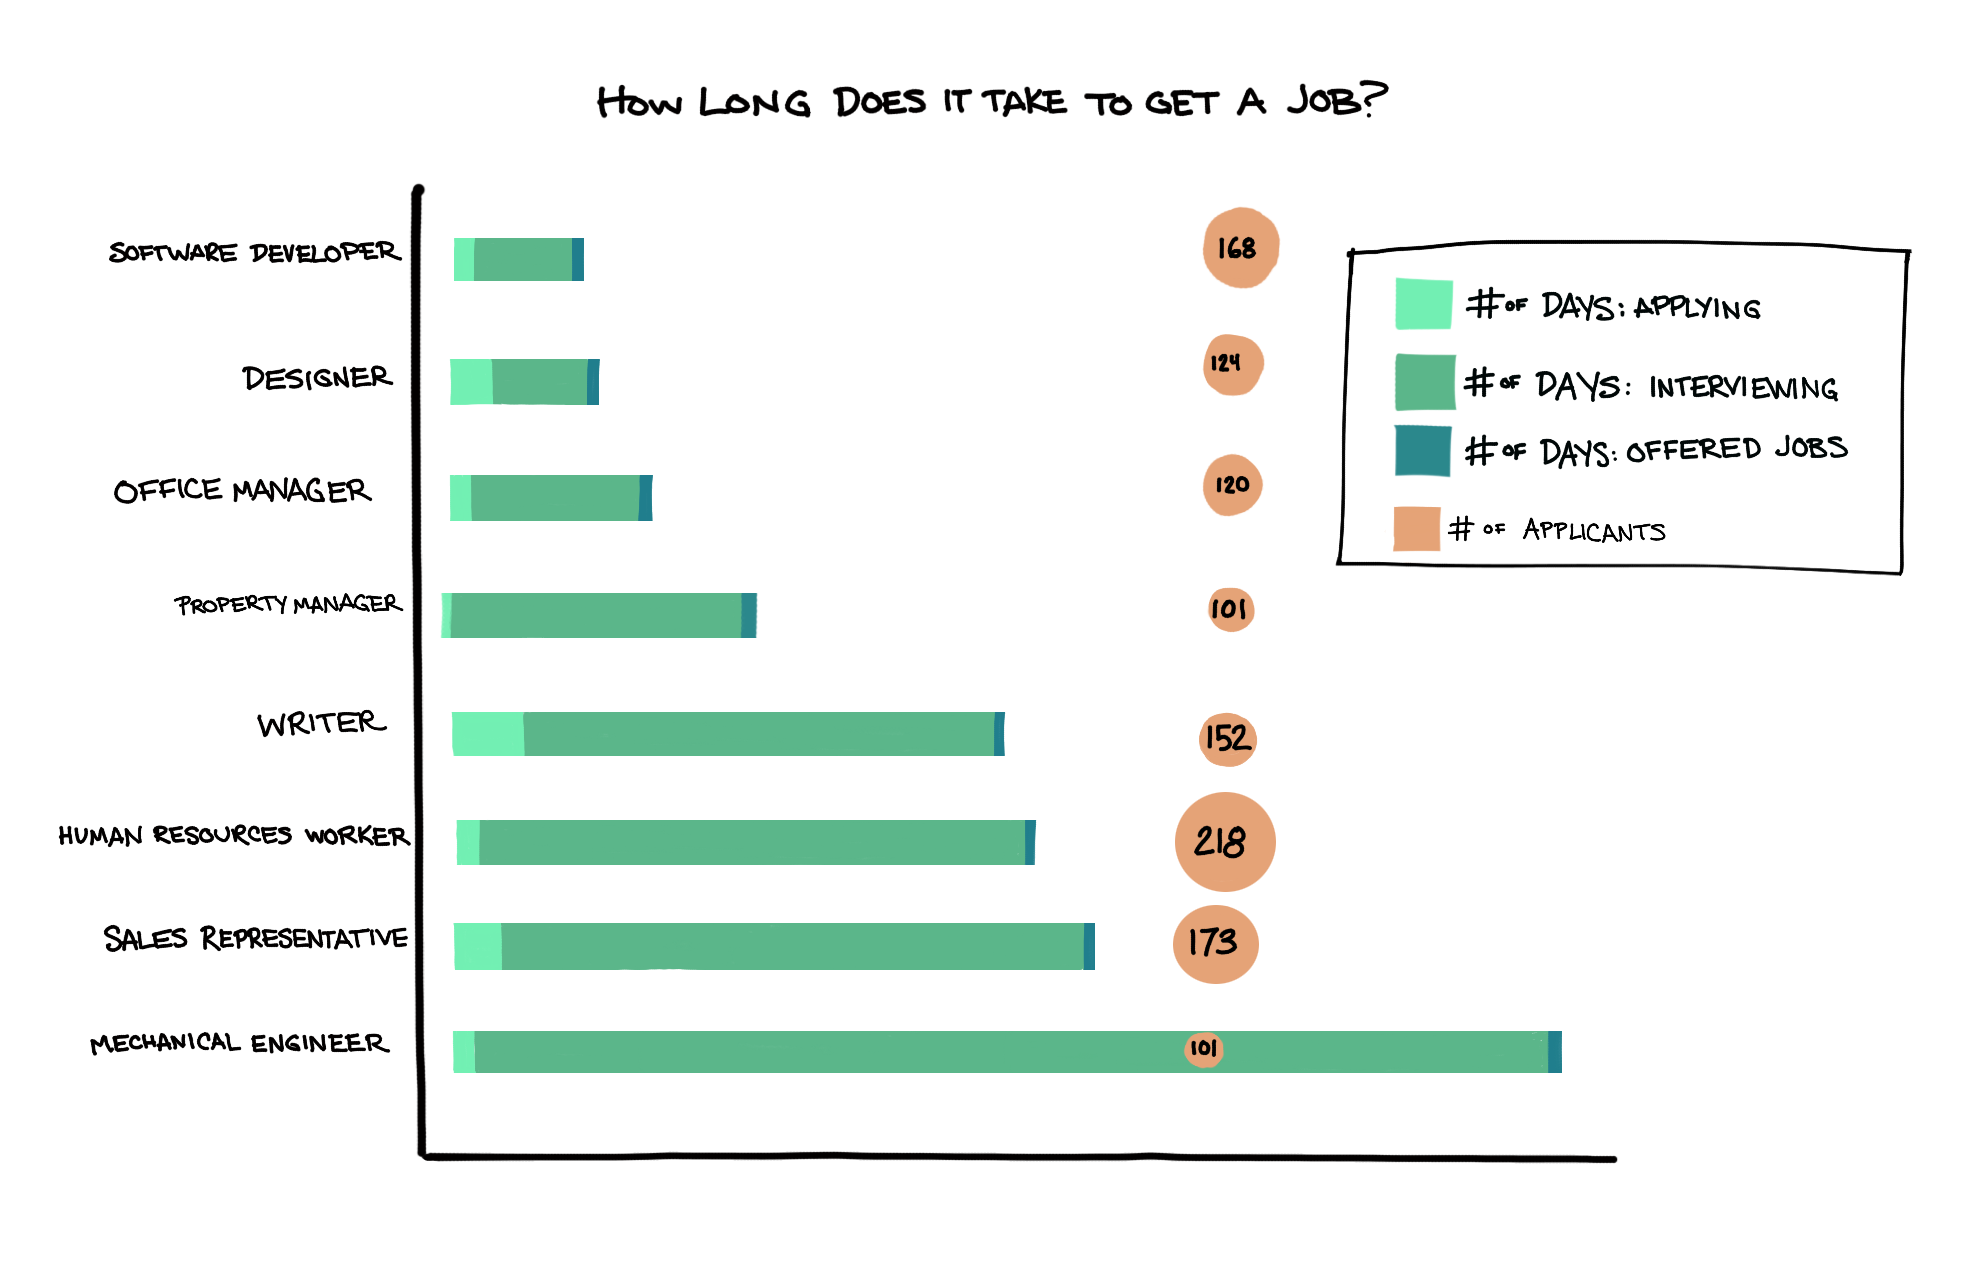 Unemployment rate and job search length by type of job